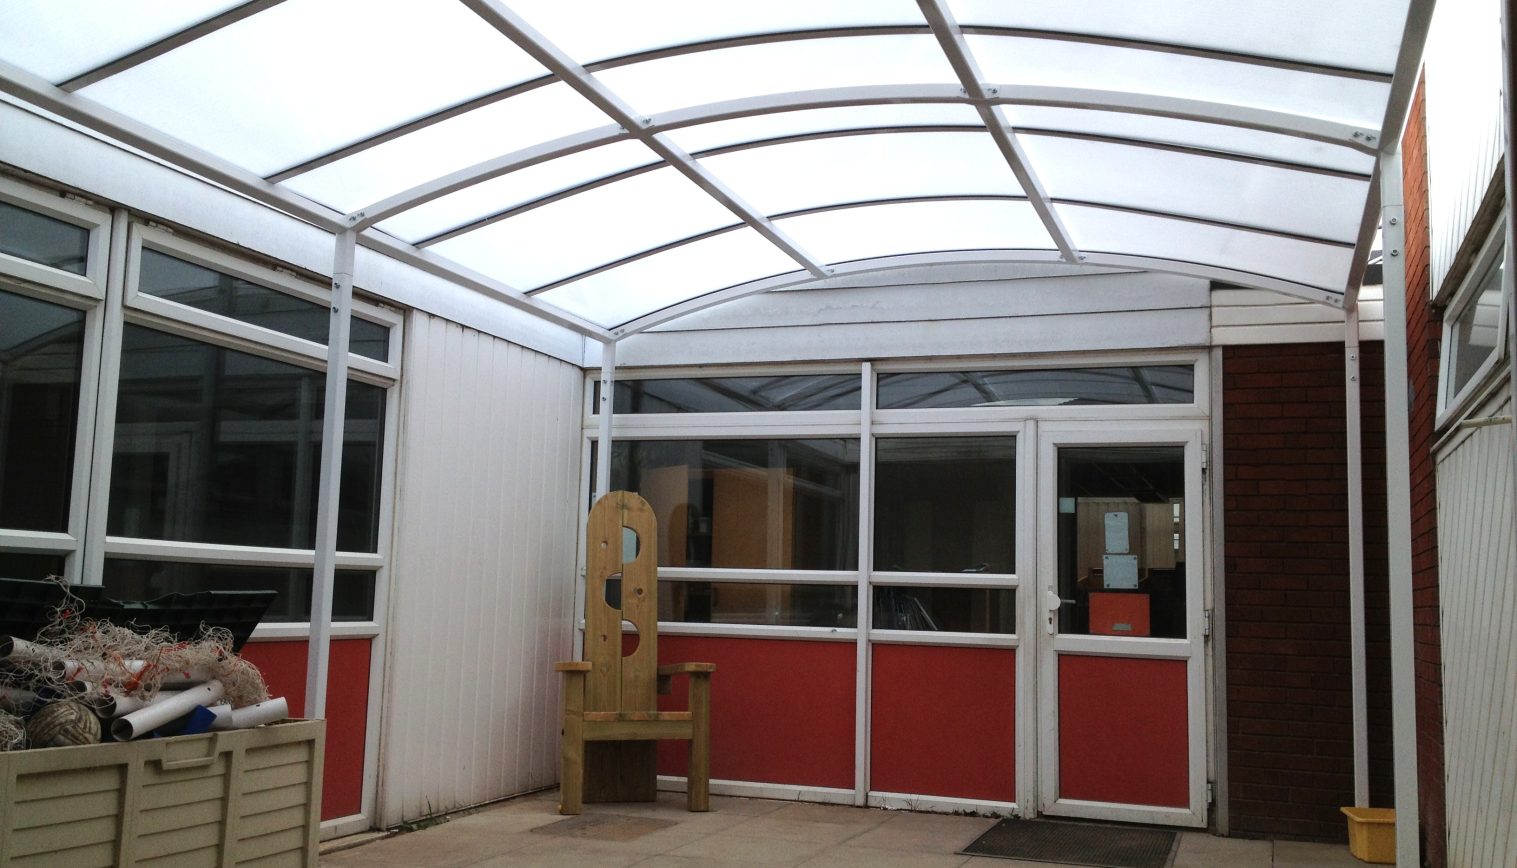 The Cannons C of E Primary School First Install